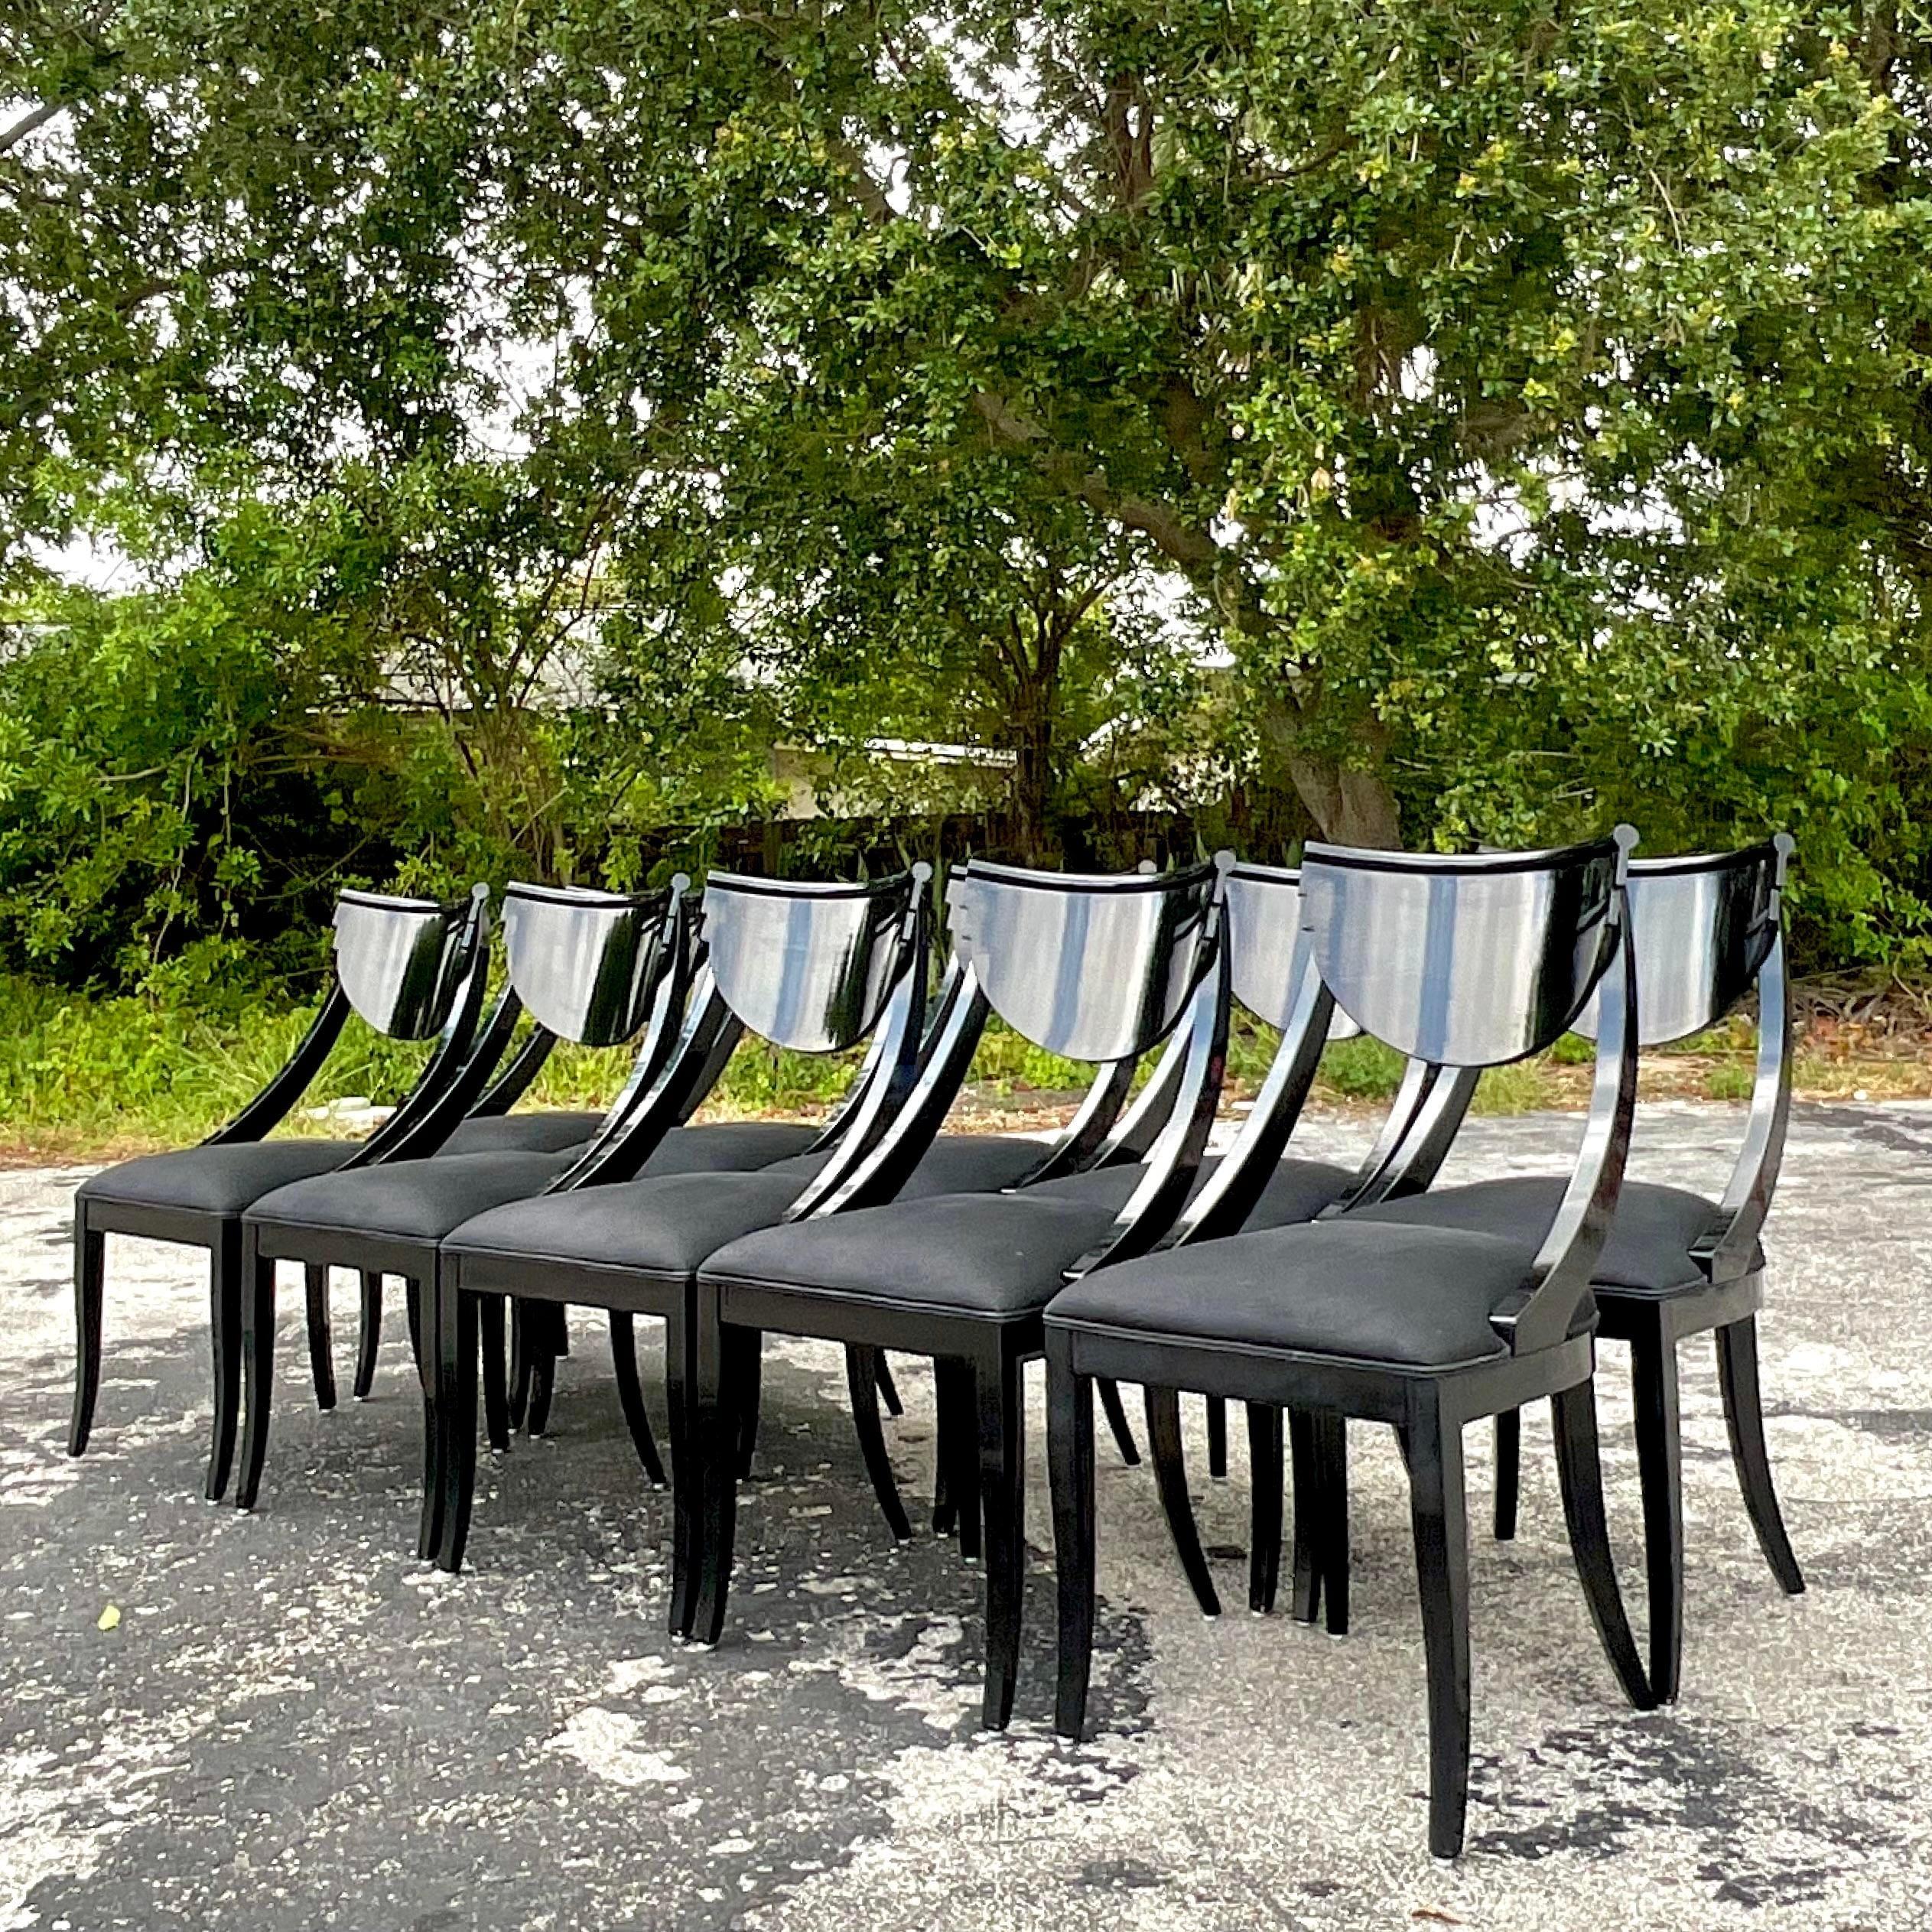 Upholstery Vintage Italian Pietro Constantini Black Lacquered Kilsmos Chairs - Set of 10 For Sale